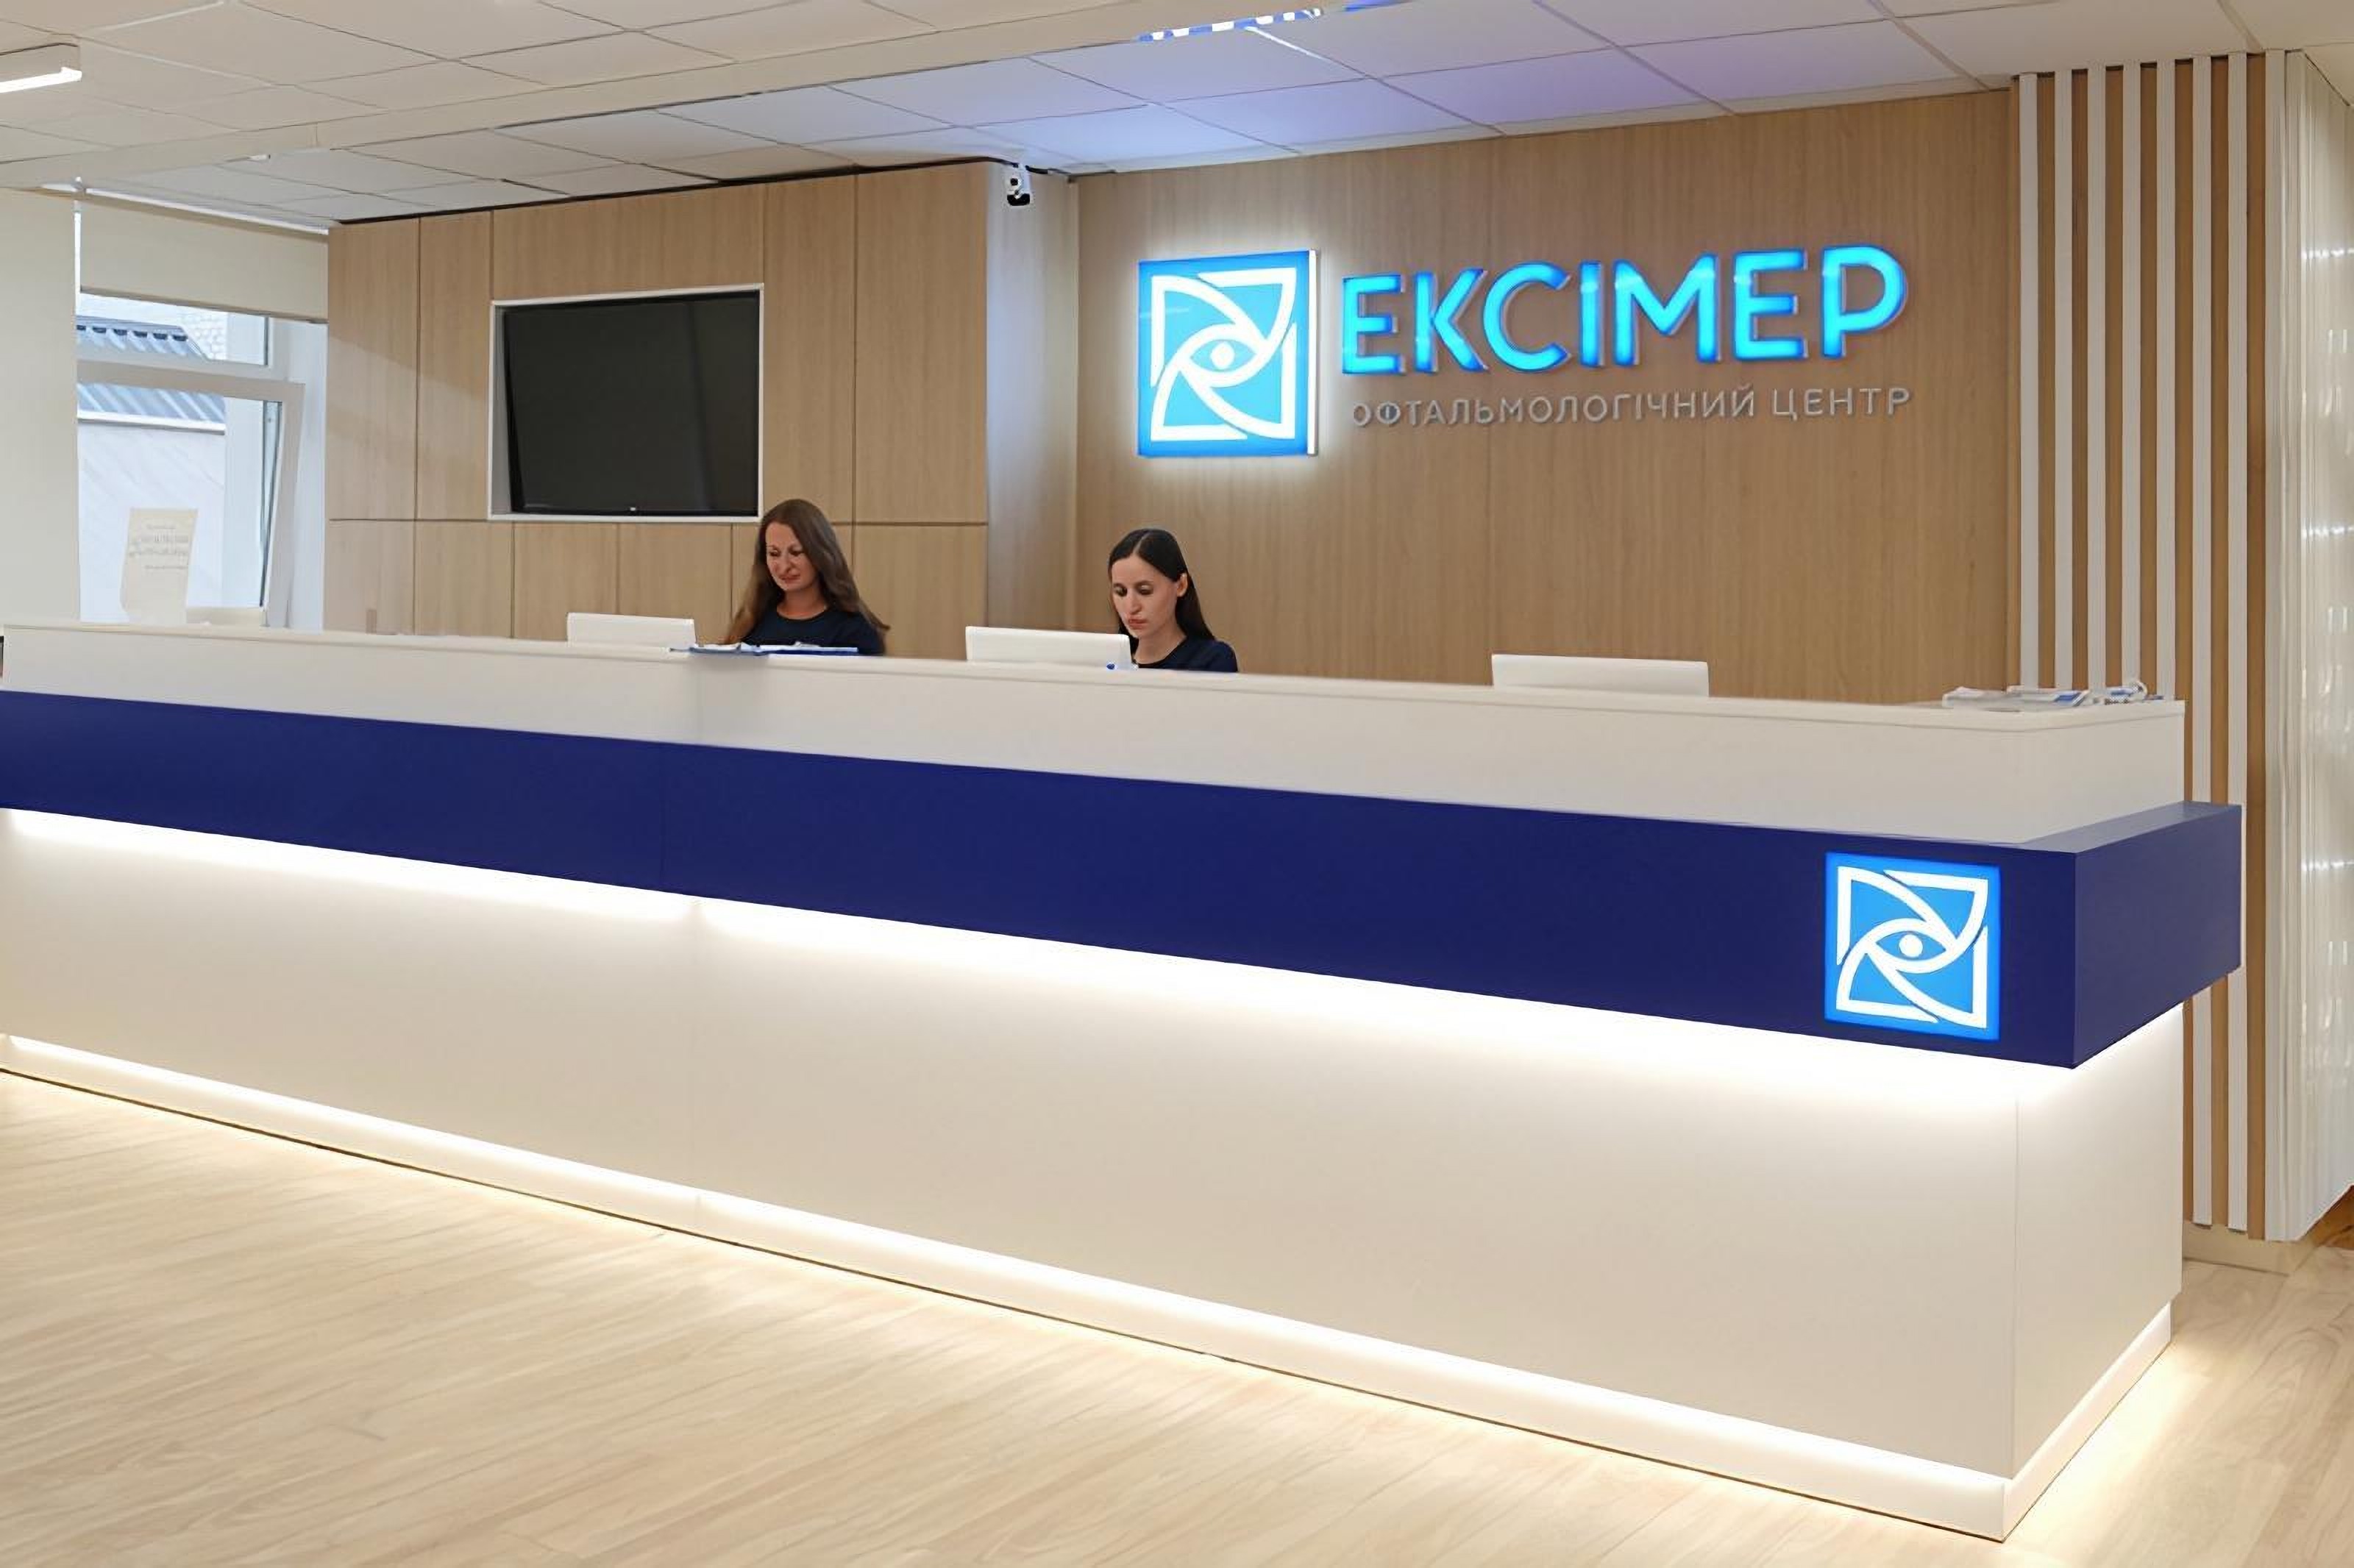 The Reception of the Excimer Ophthalmology Clinic